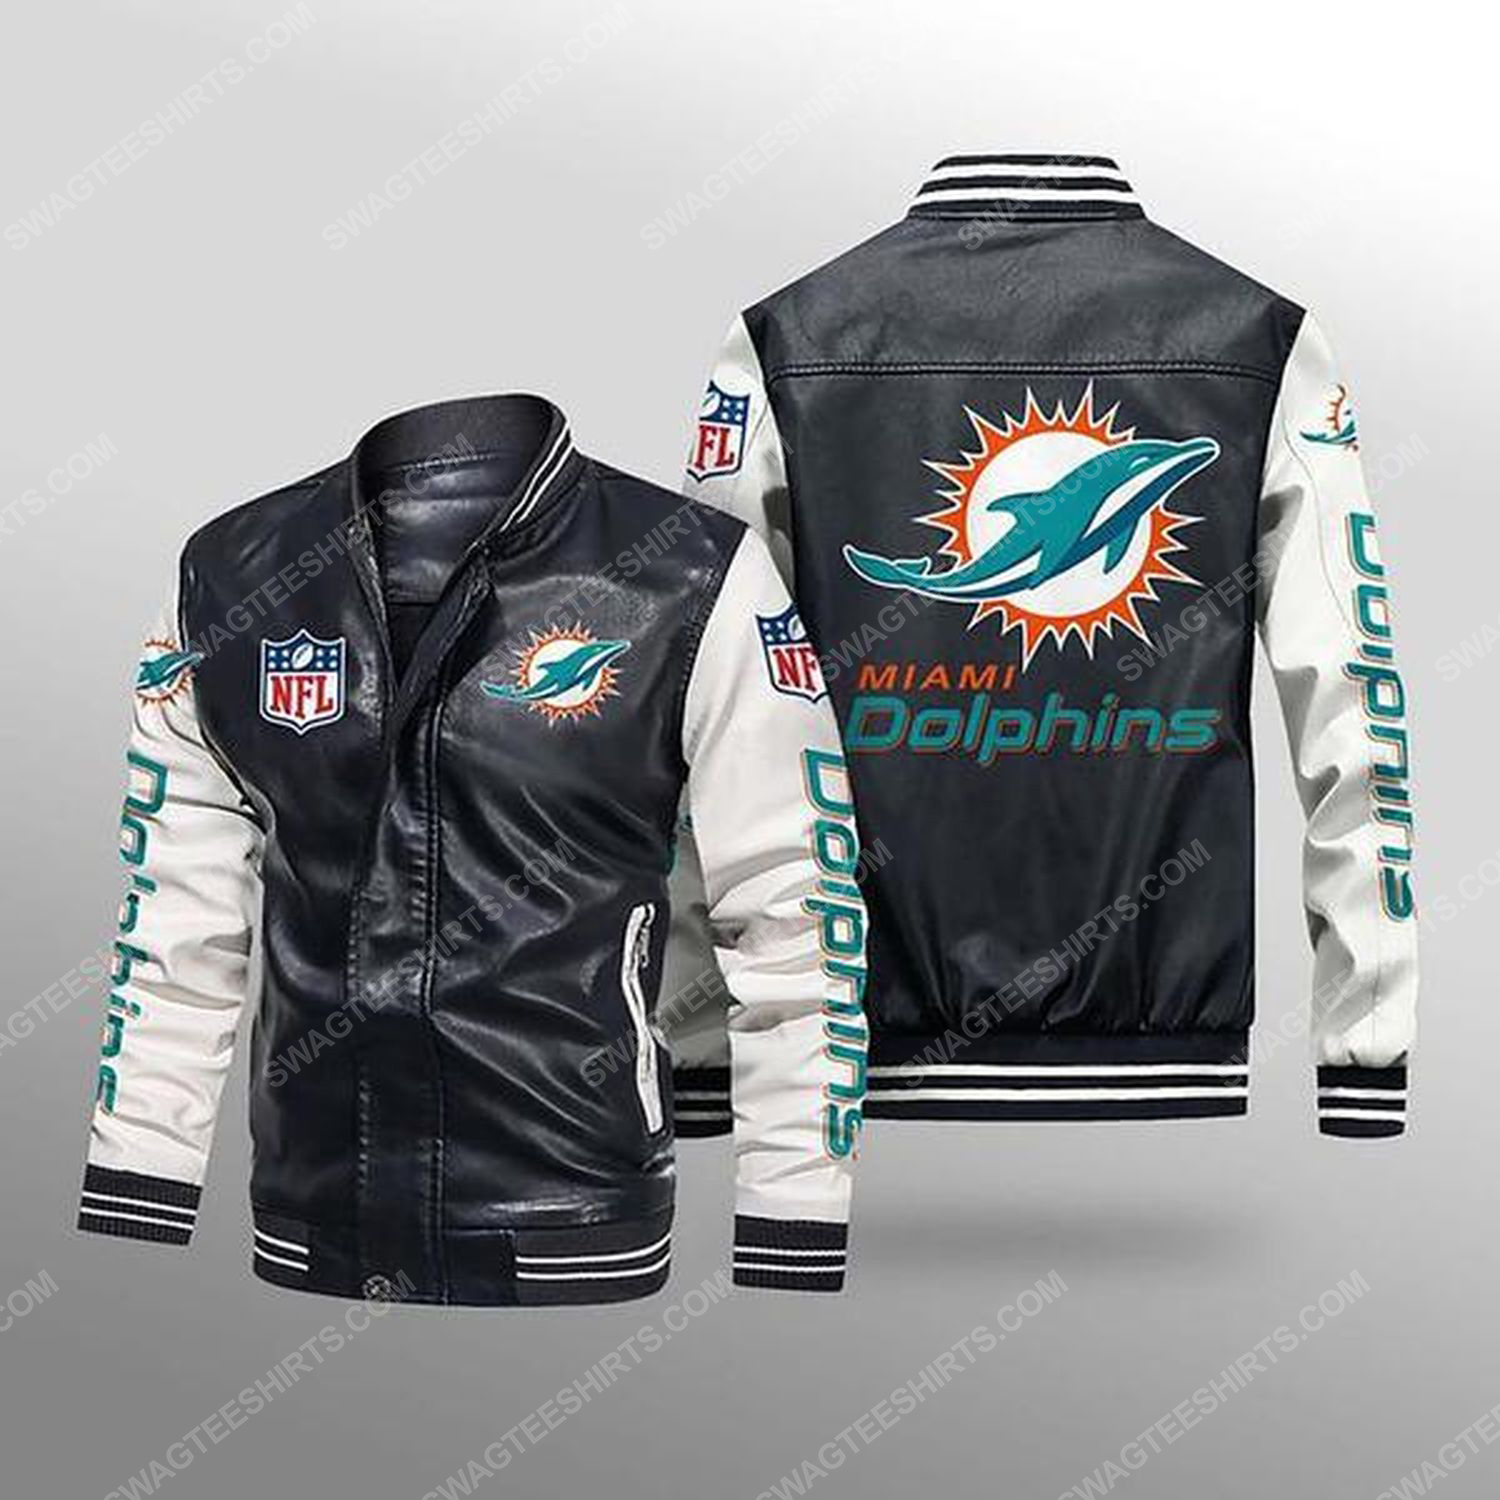 Miami dolphins all over print leather bomber jacket - white